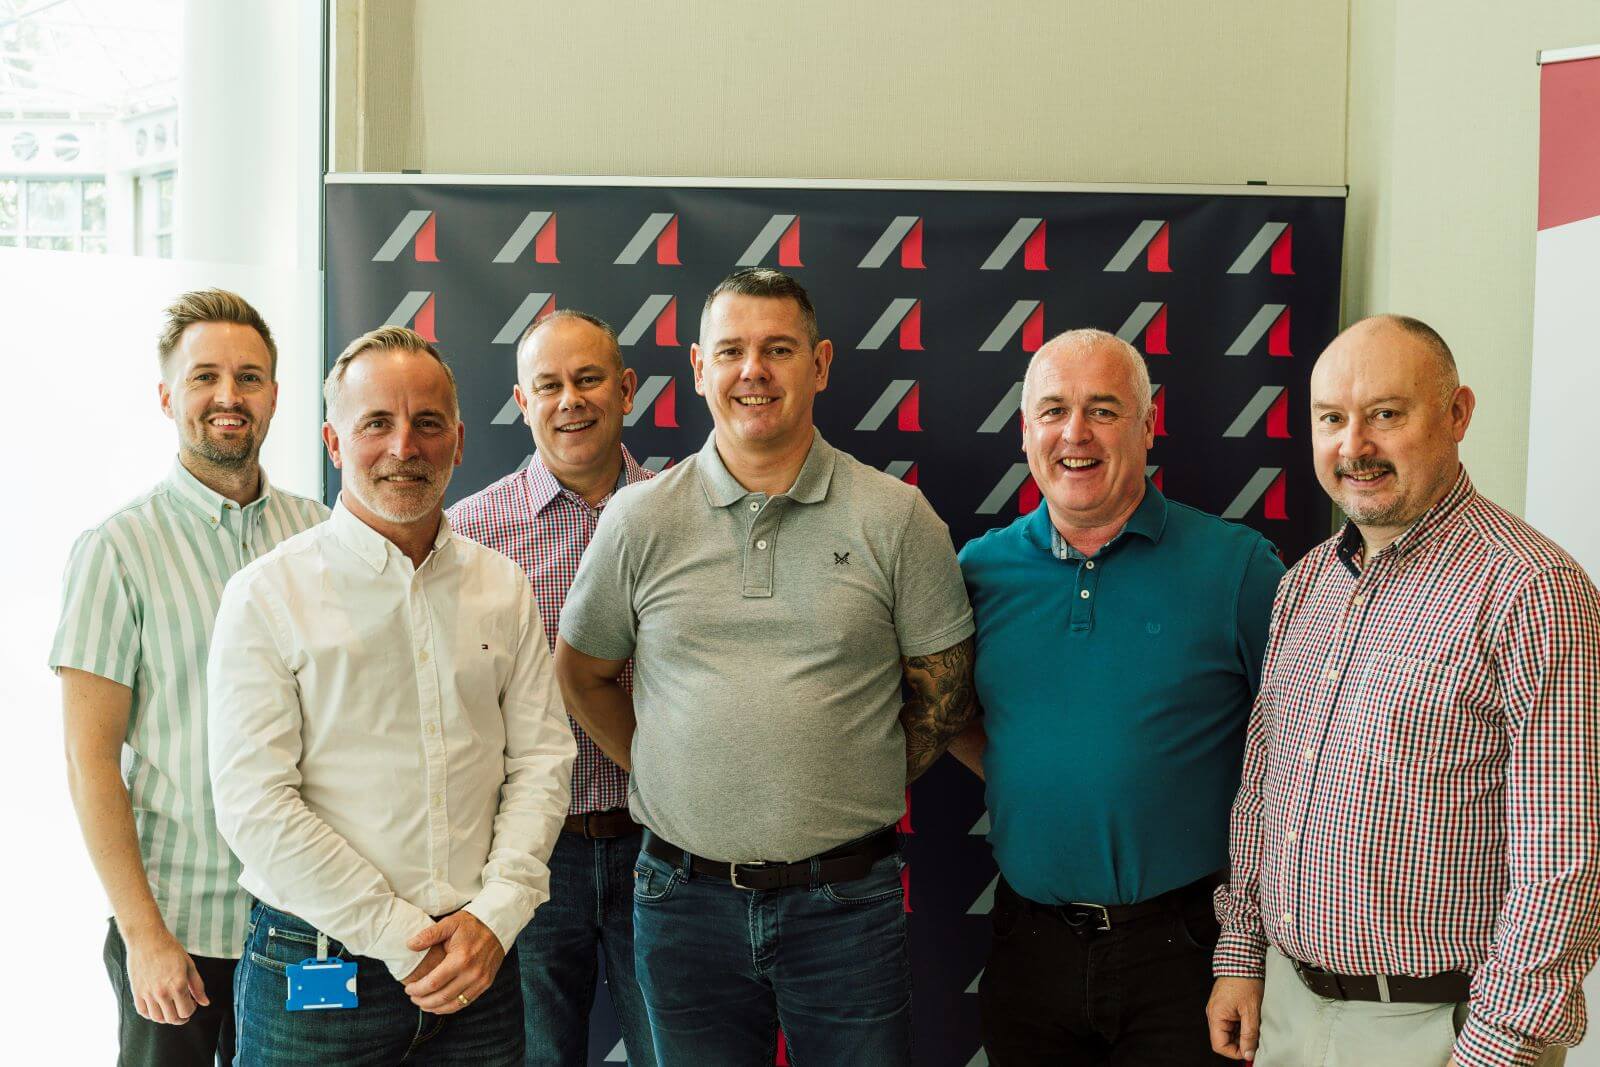 The coach and bus team at Asset Alliance Group, including Commercial Director Martyn Bellis, second from left 